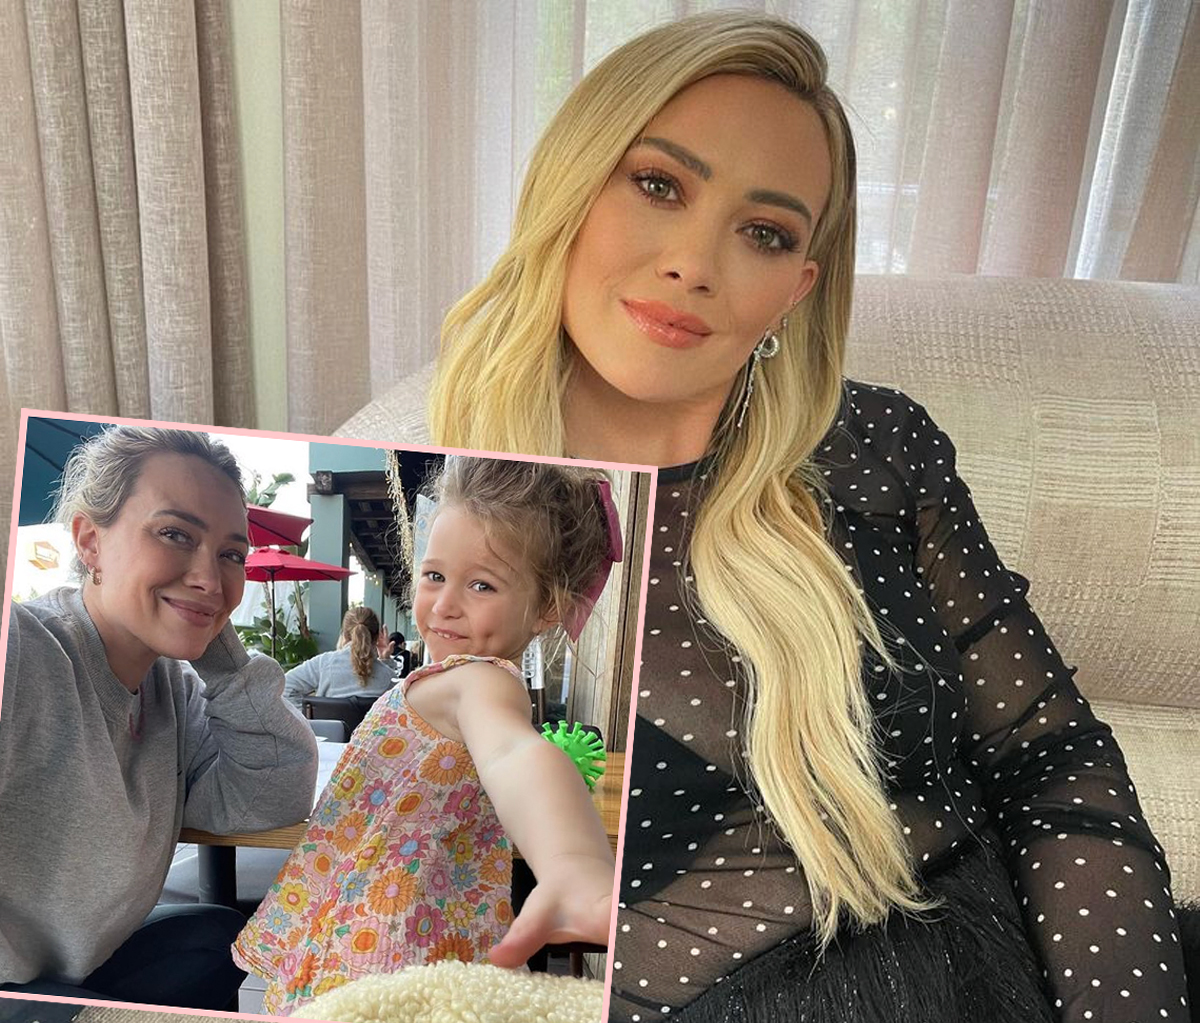 #Hilary Duff Finally Responds To Controversy Over 3-Year-Old Daughter’s Car Seat Safety!